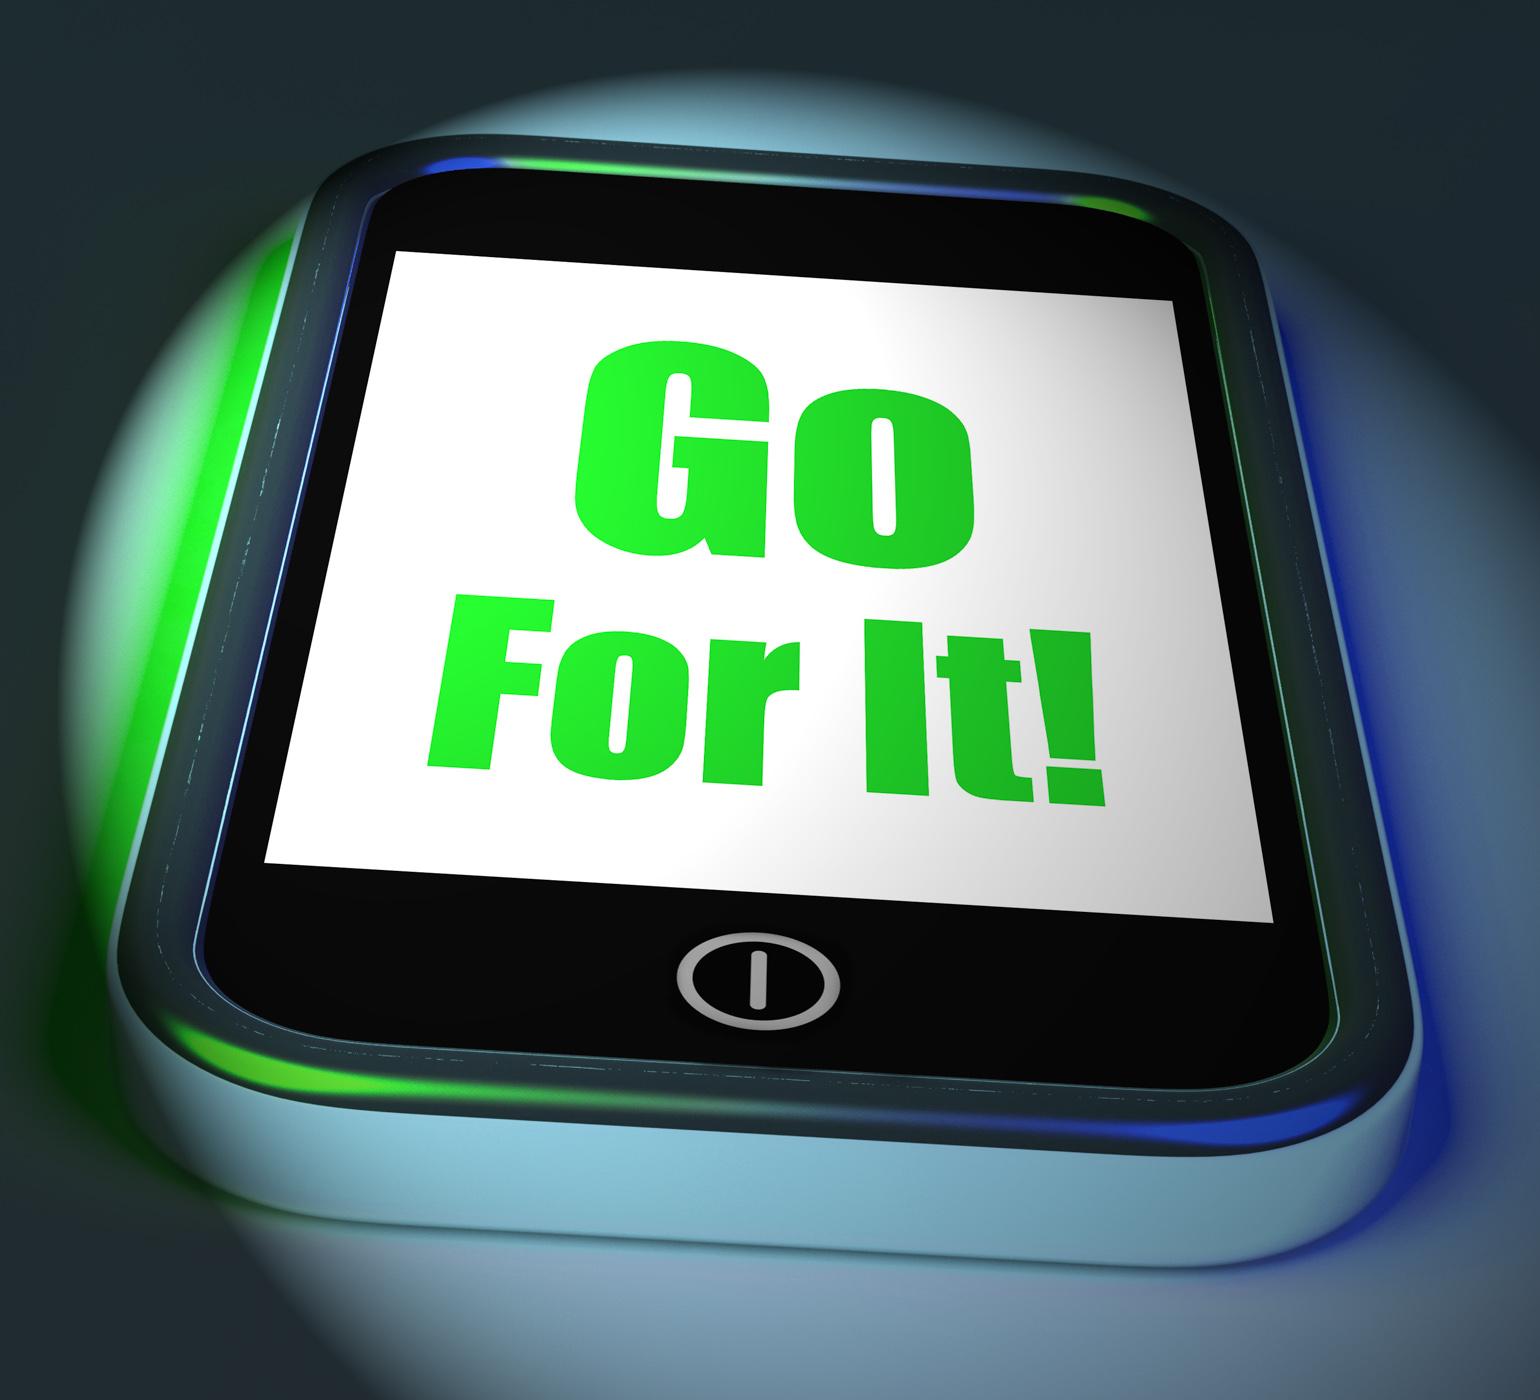 Go for it on phone displays take action photo